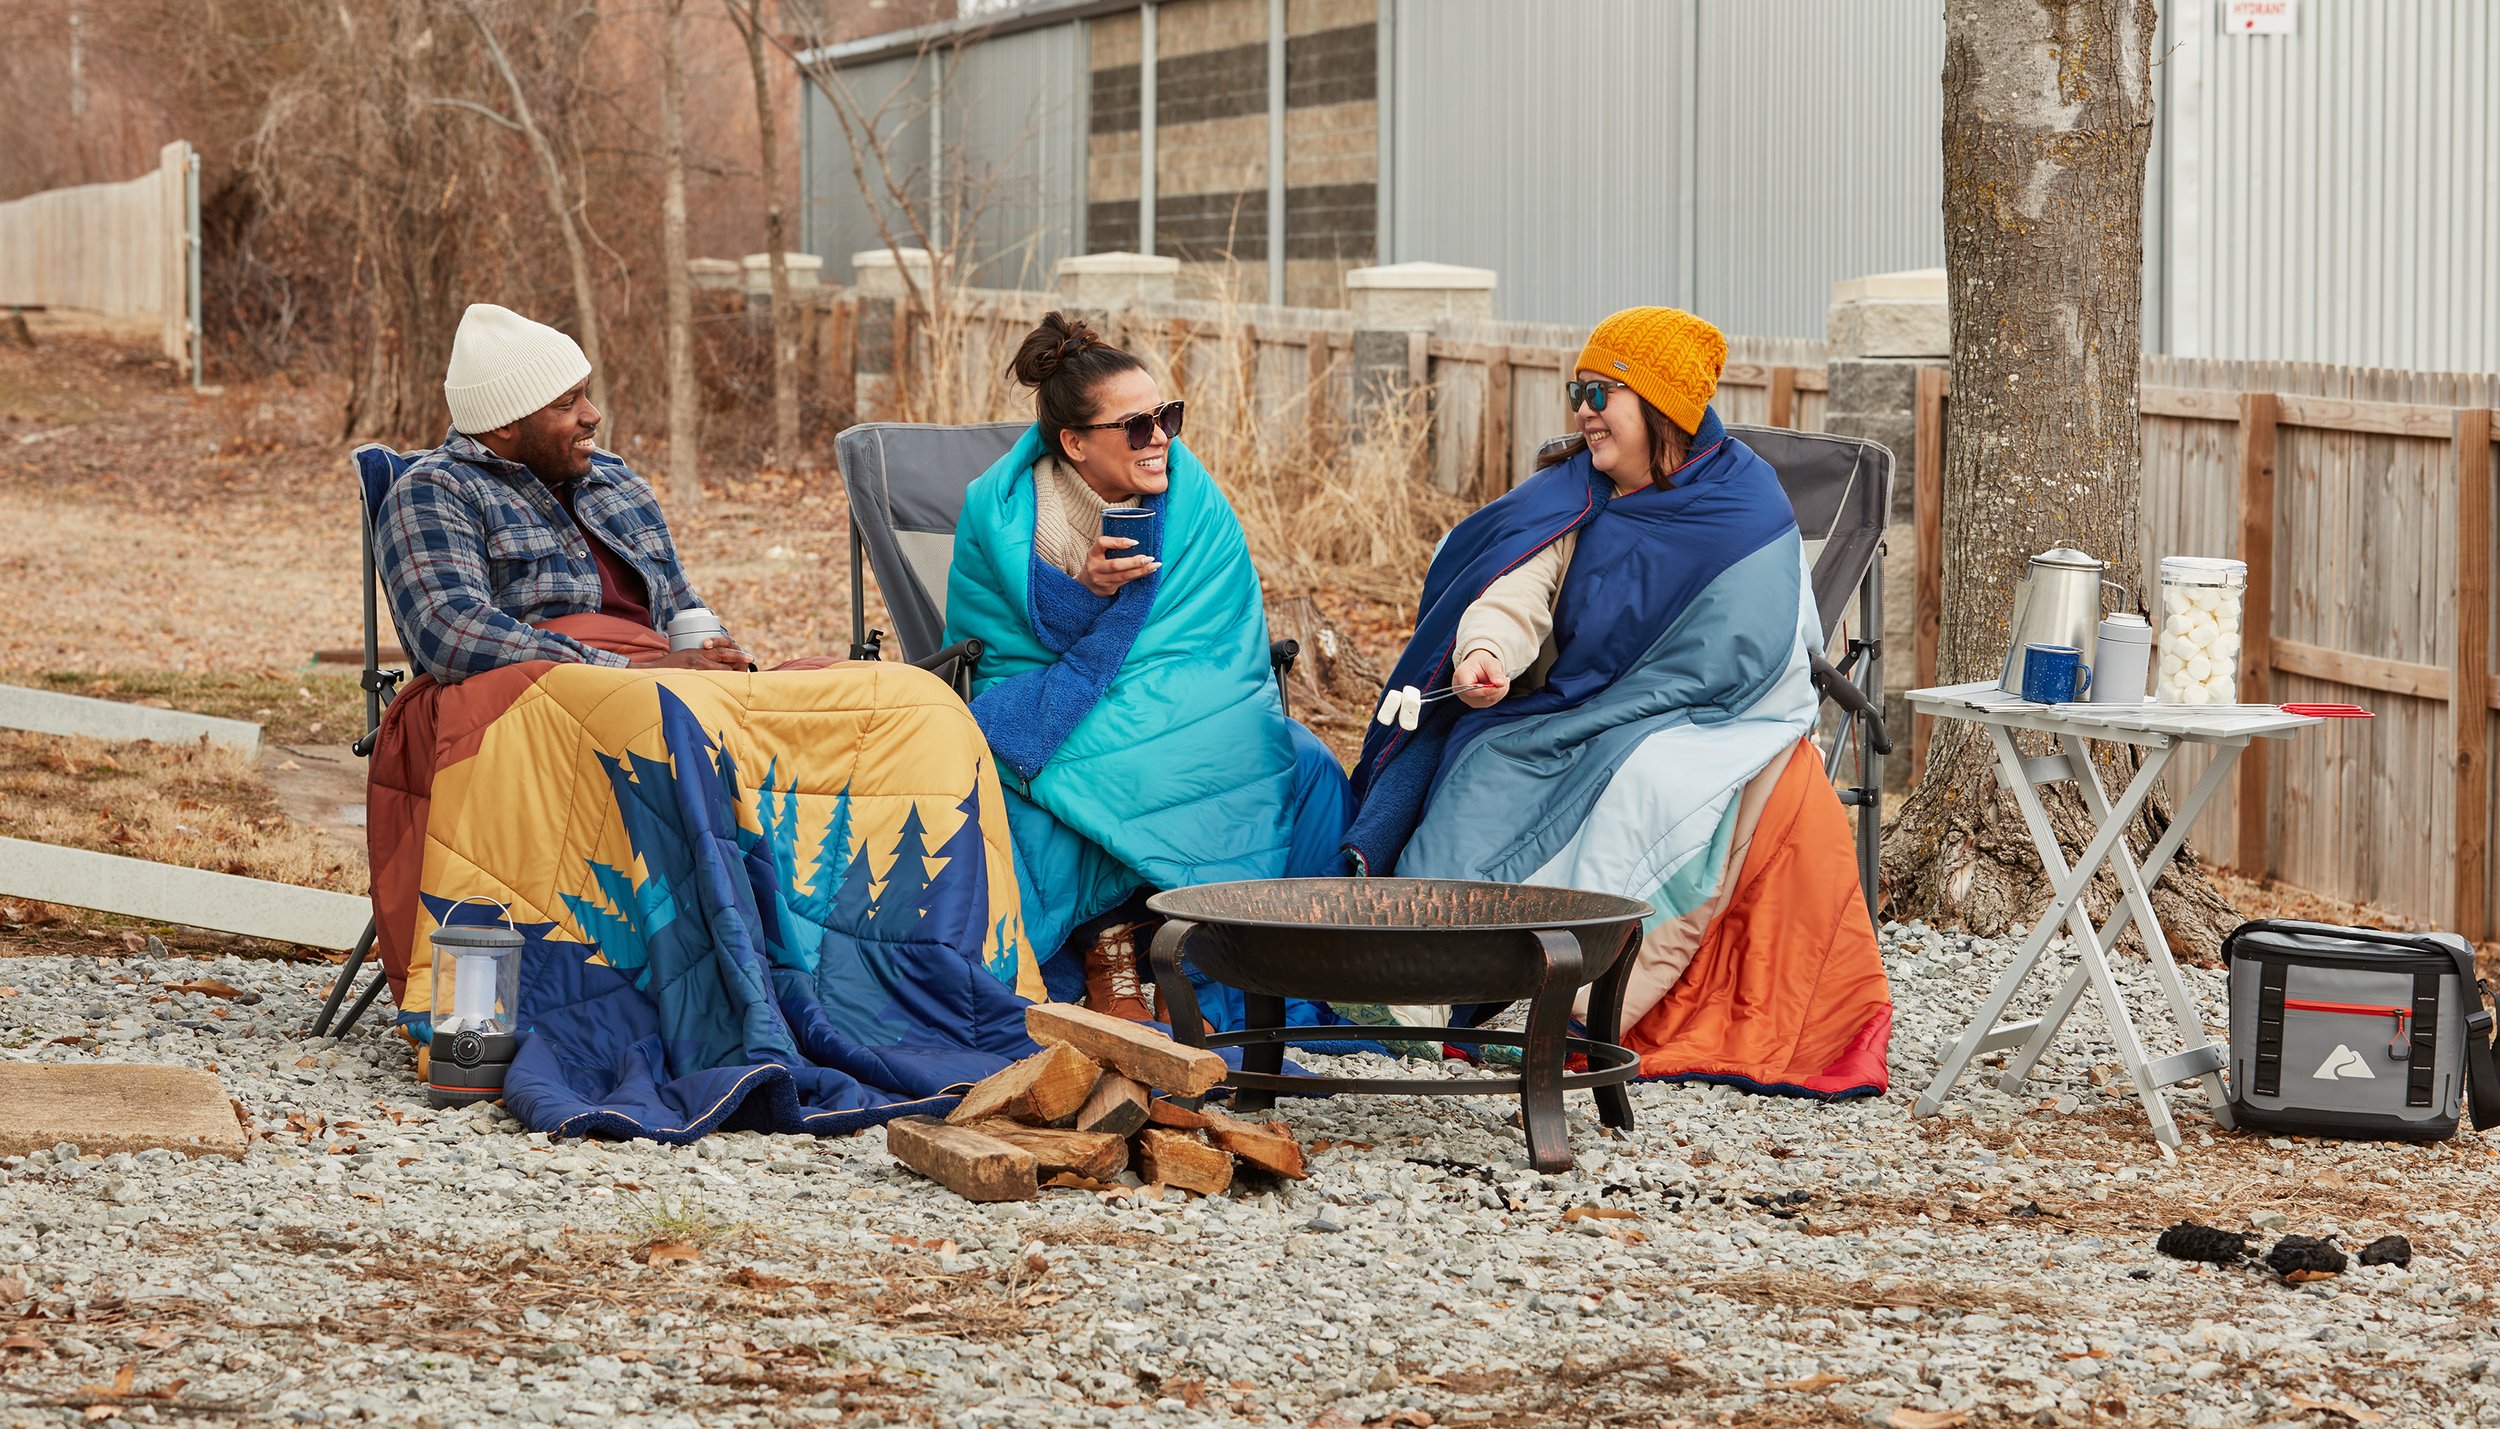 MM_Lifestyle_Camping_Blanket_with_3 Adults-2.jpg